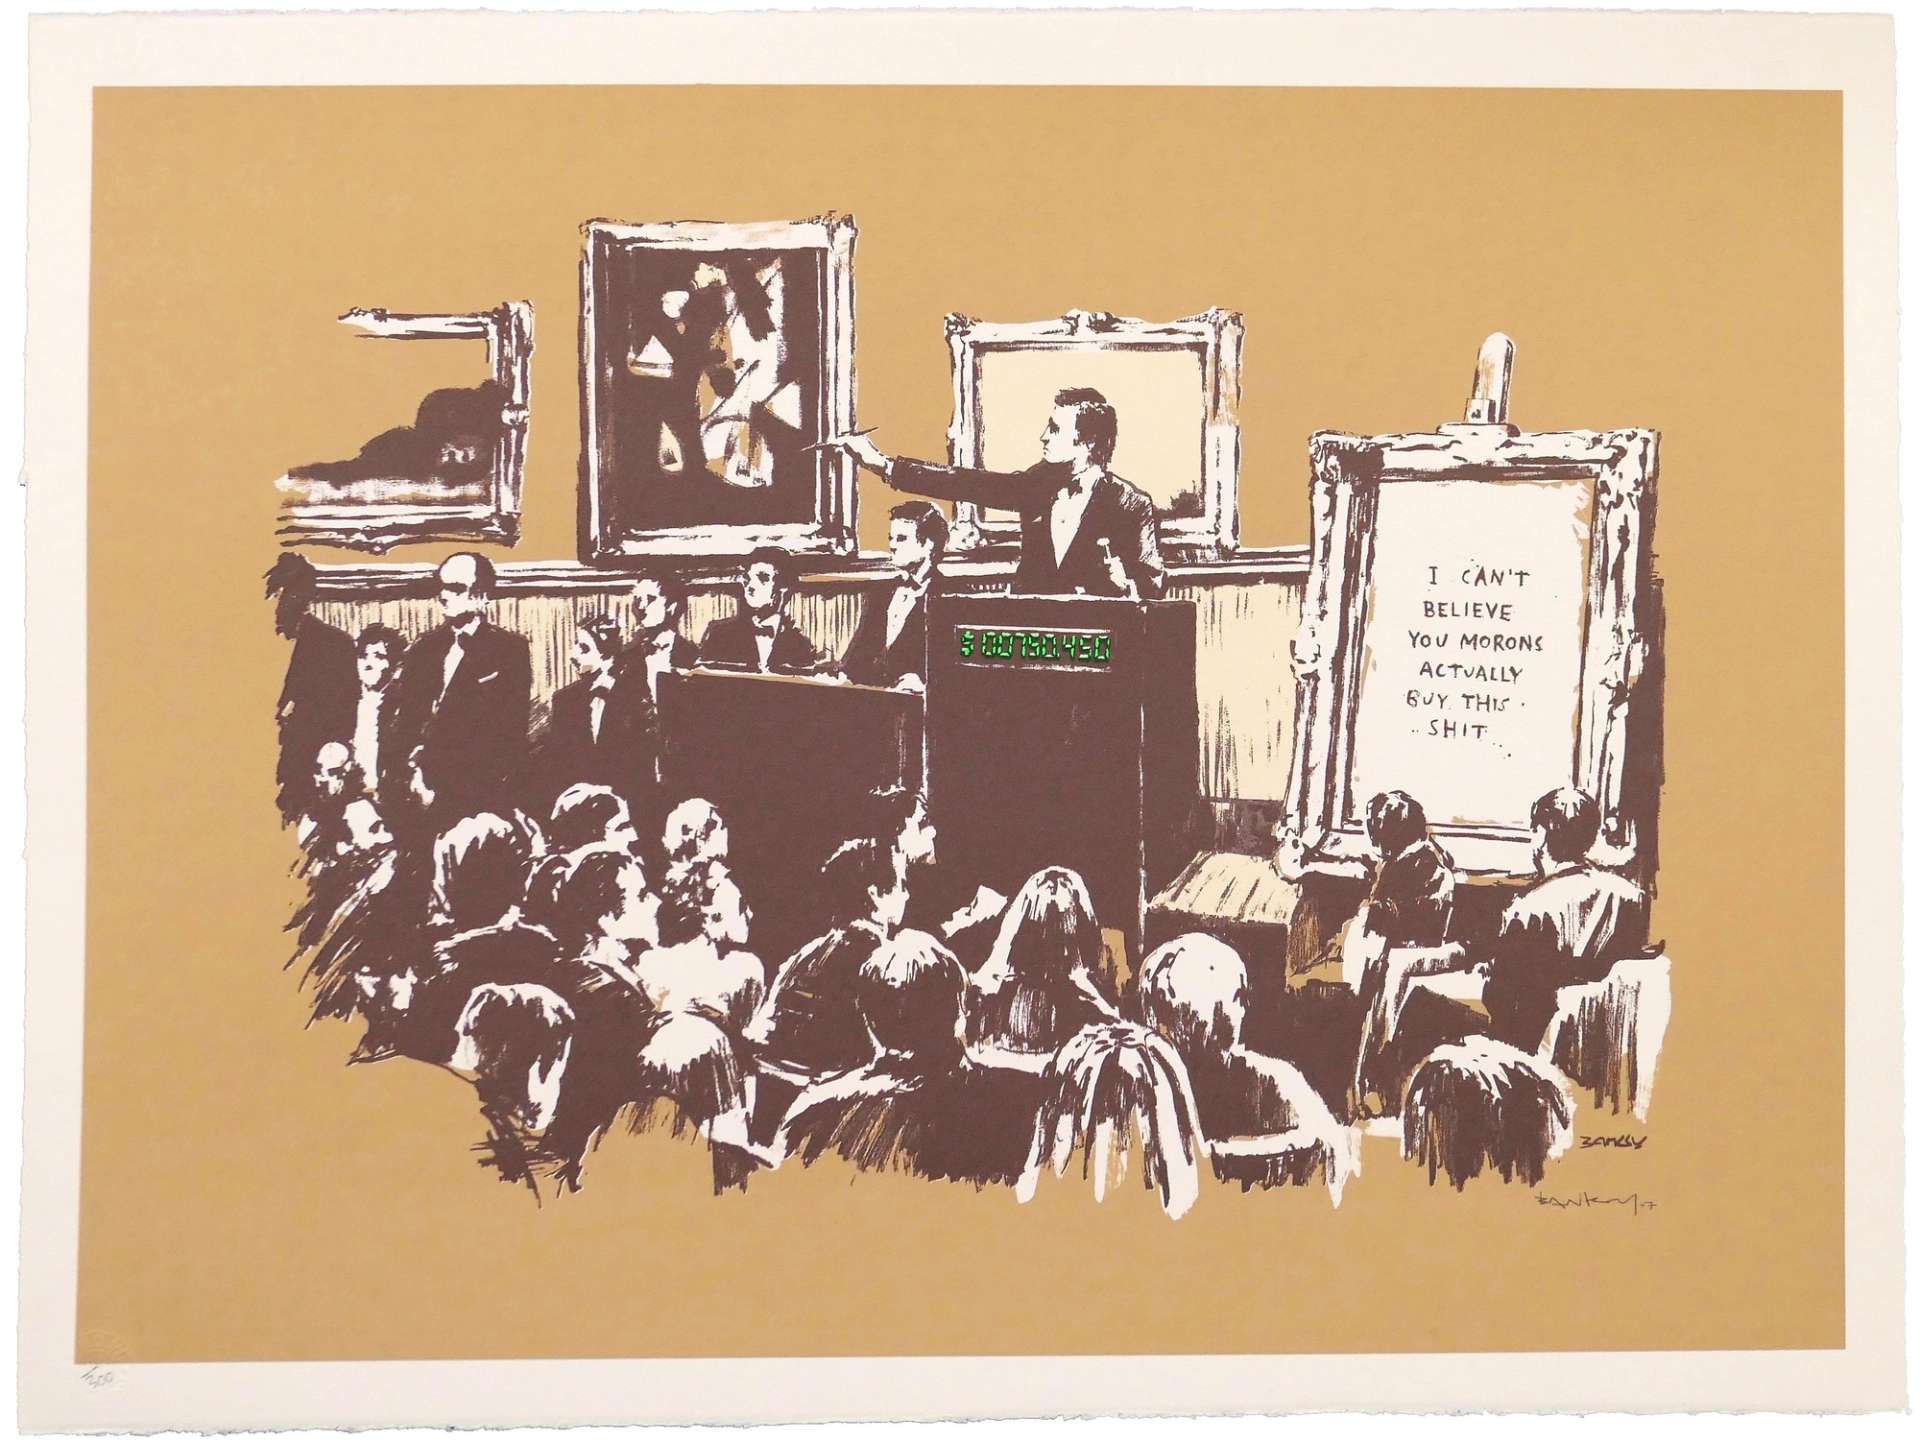 At Auctions, Who Benefits Most From Art-Market Boom? - The New